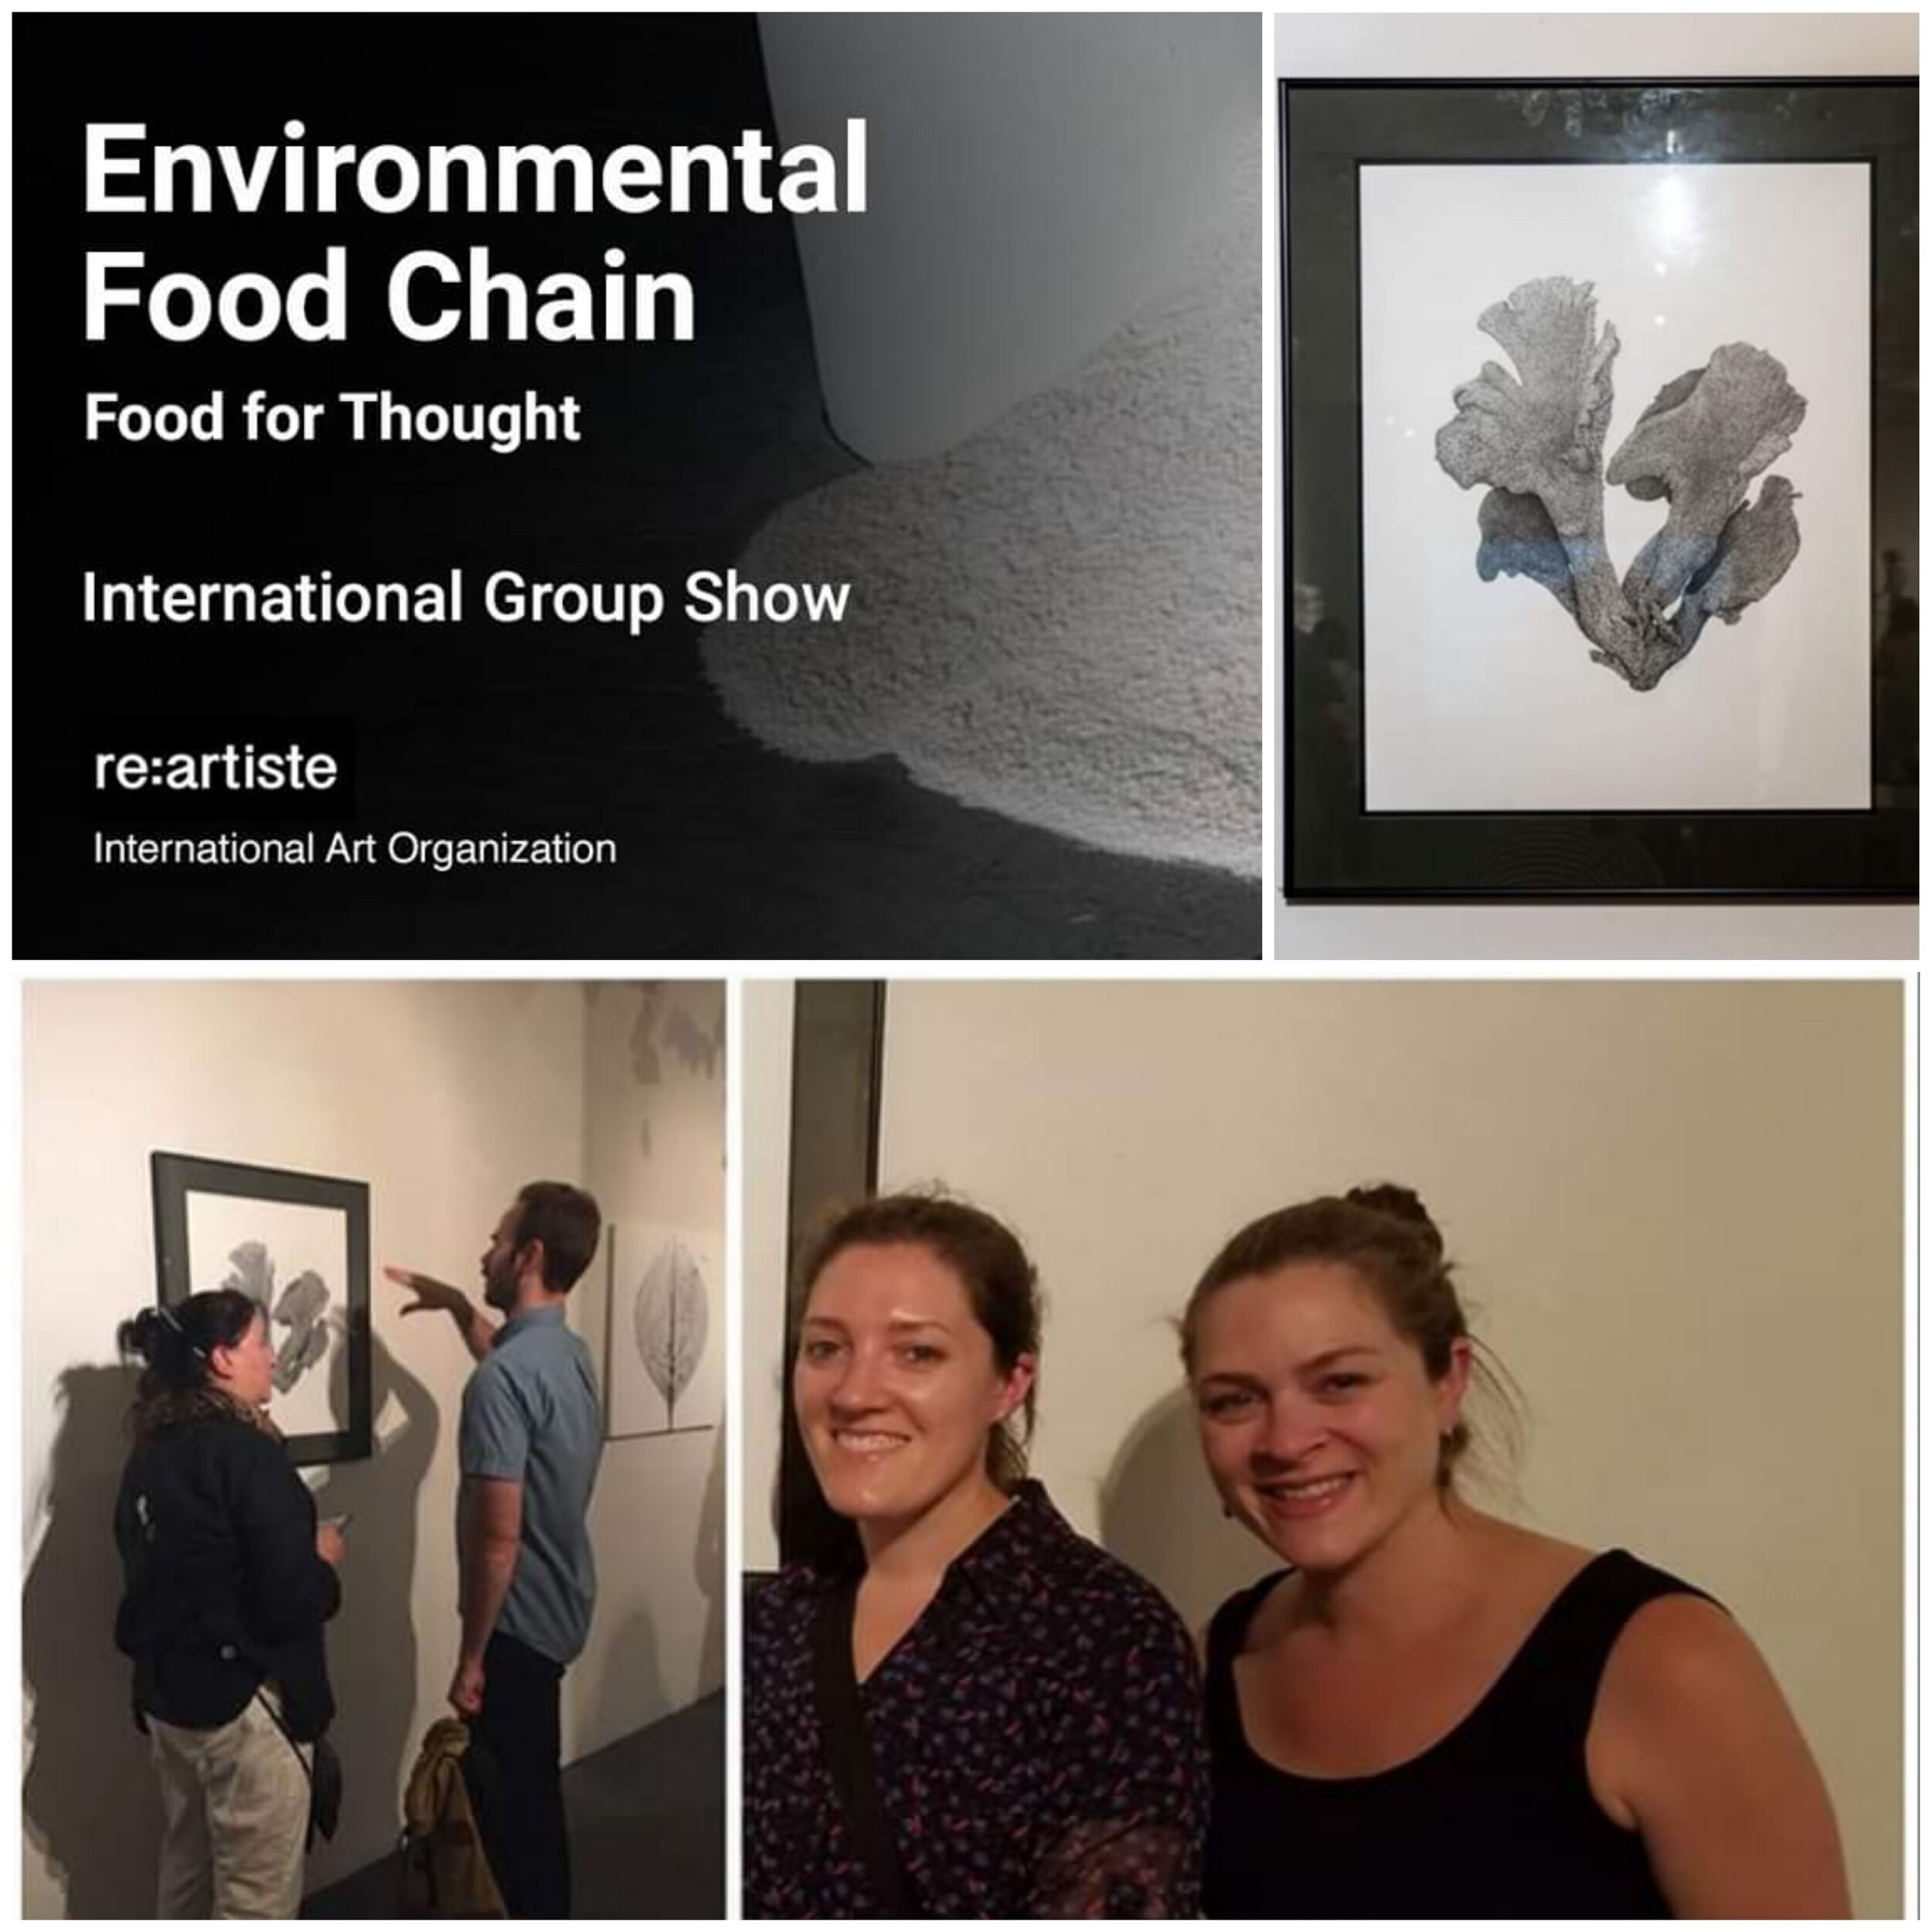 RE ARTISTE: "Environmental Food Chain" Food for Thought